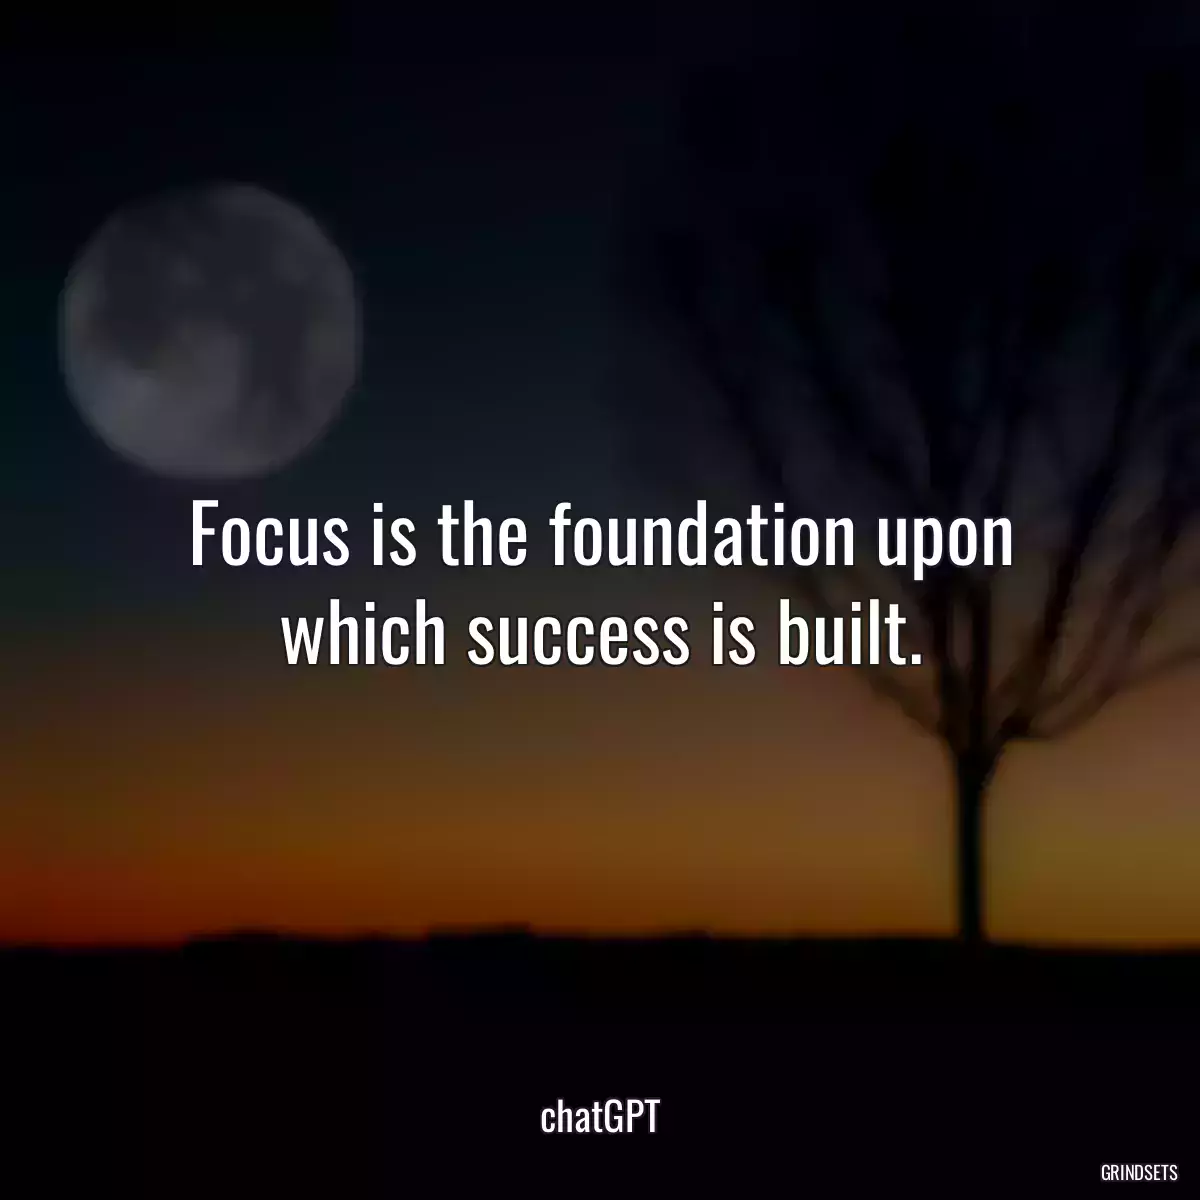 Focus is the foundation upon which success is built.